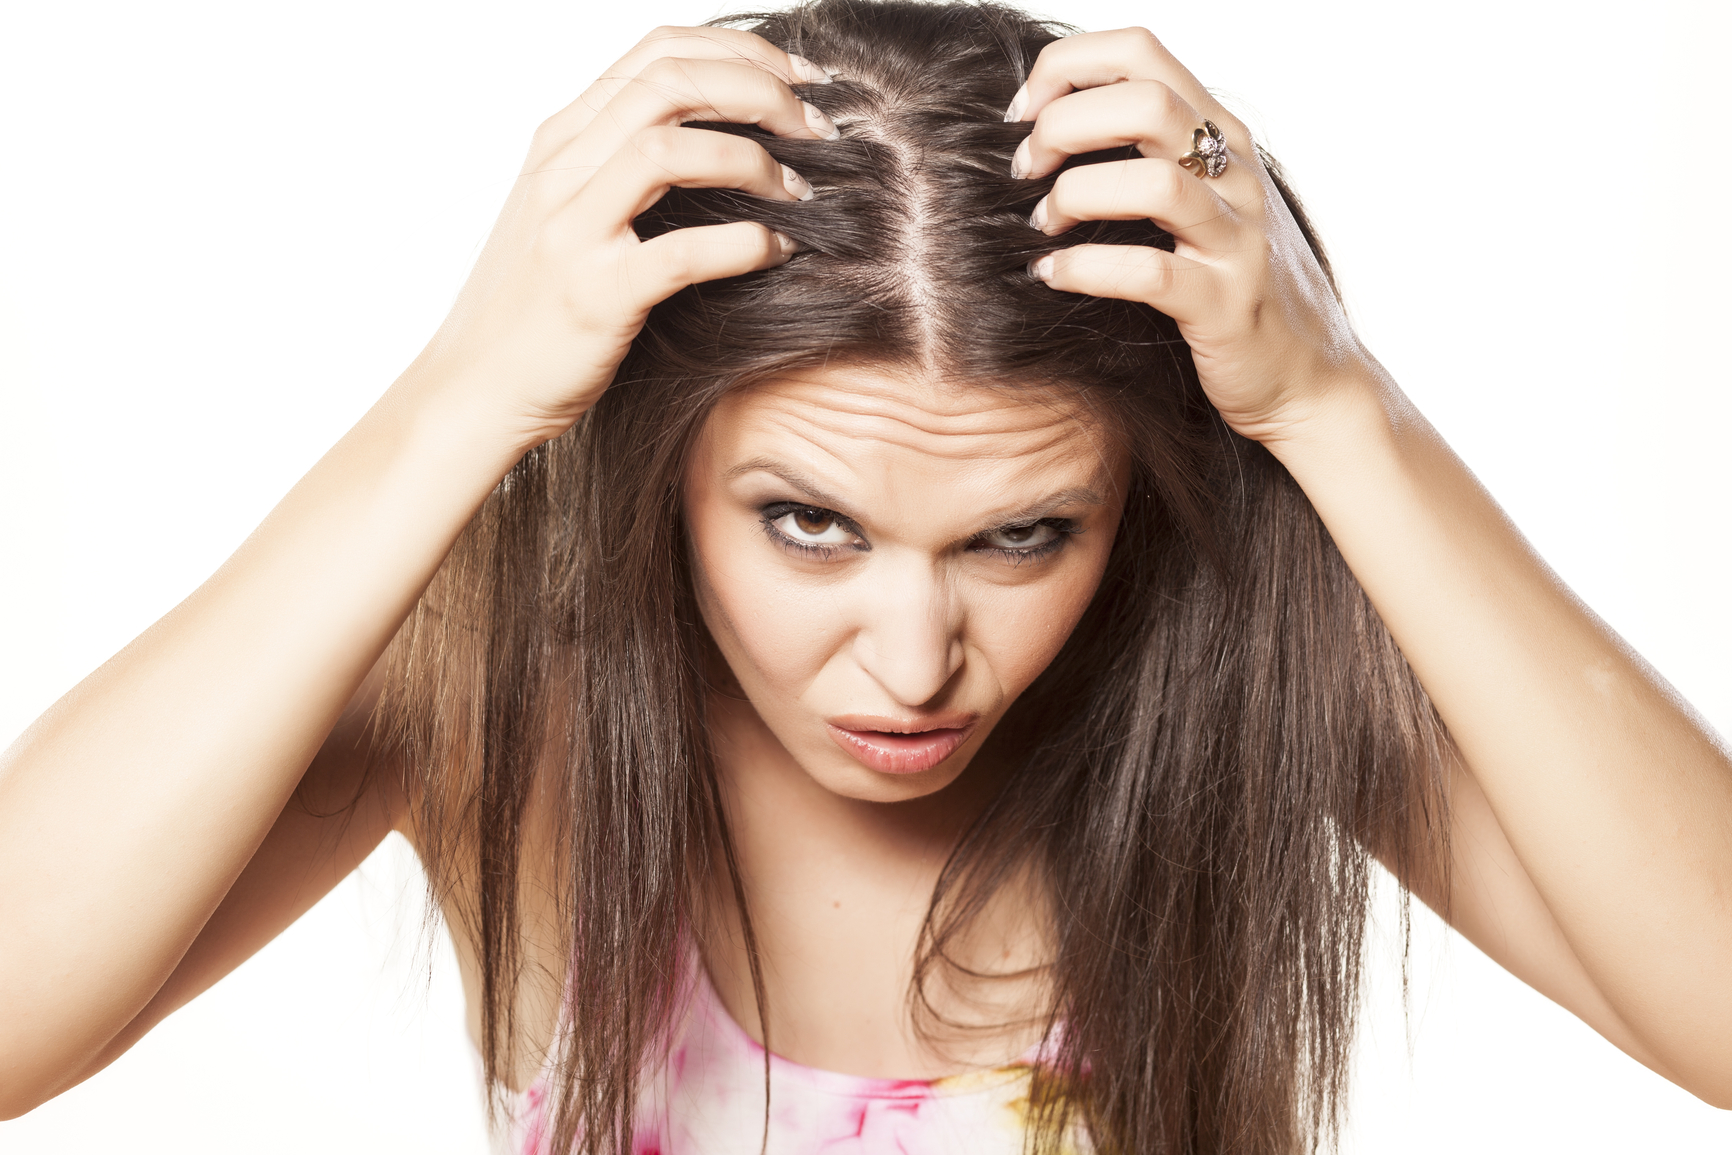 How to Treat Dandruff | Dandruff Causes and Dandruff Cures